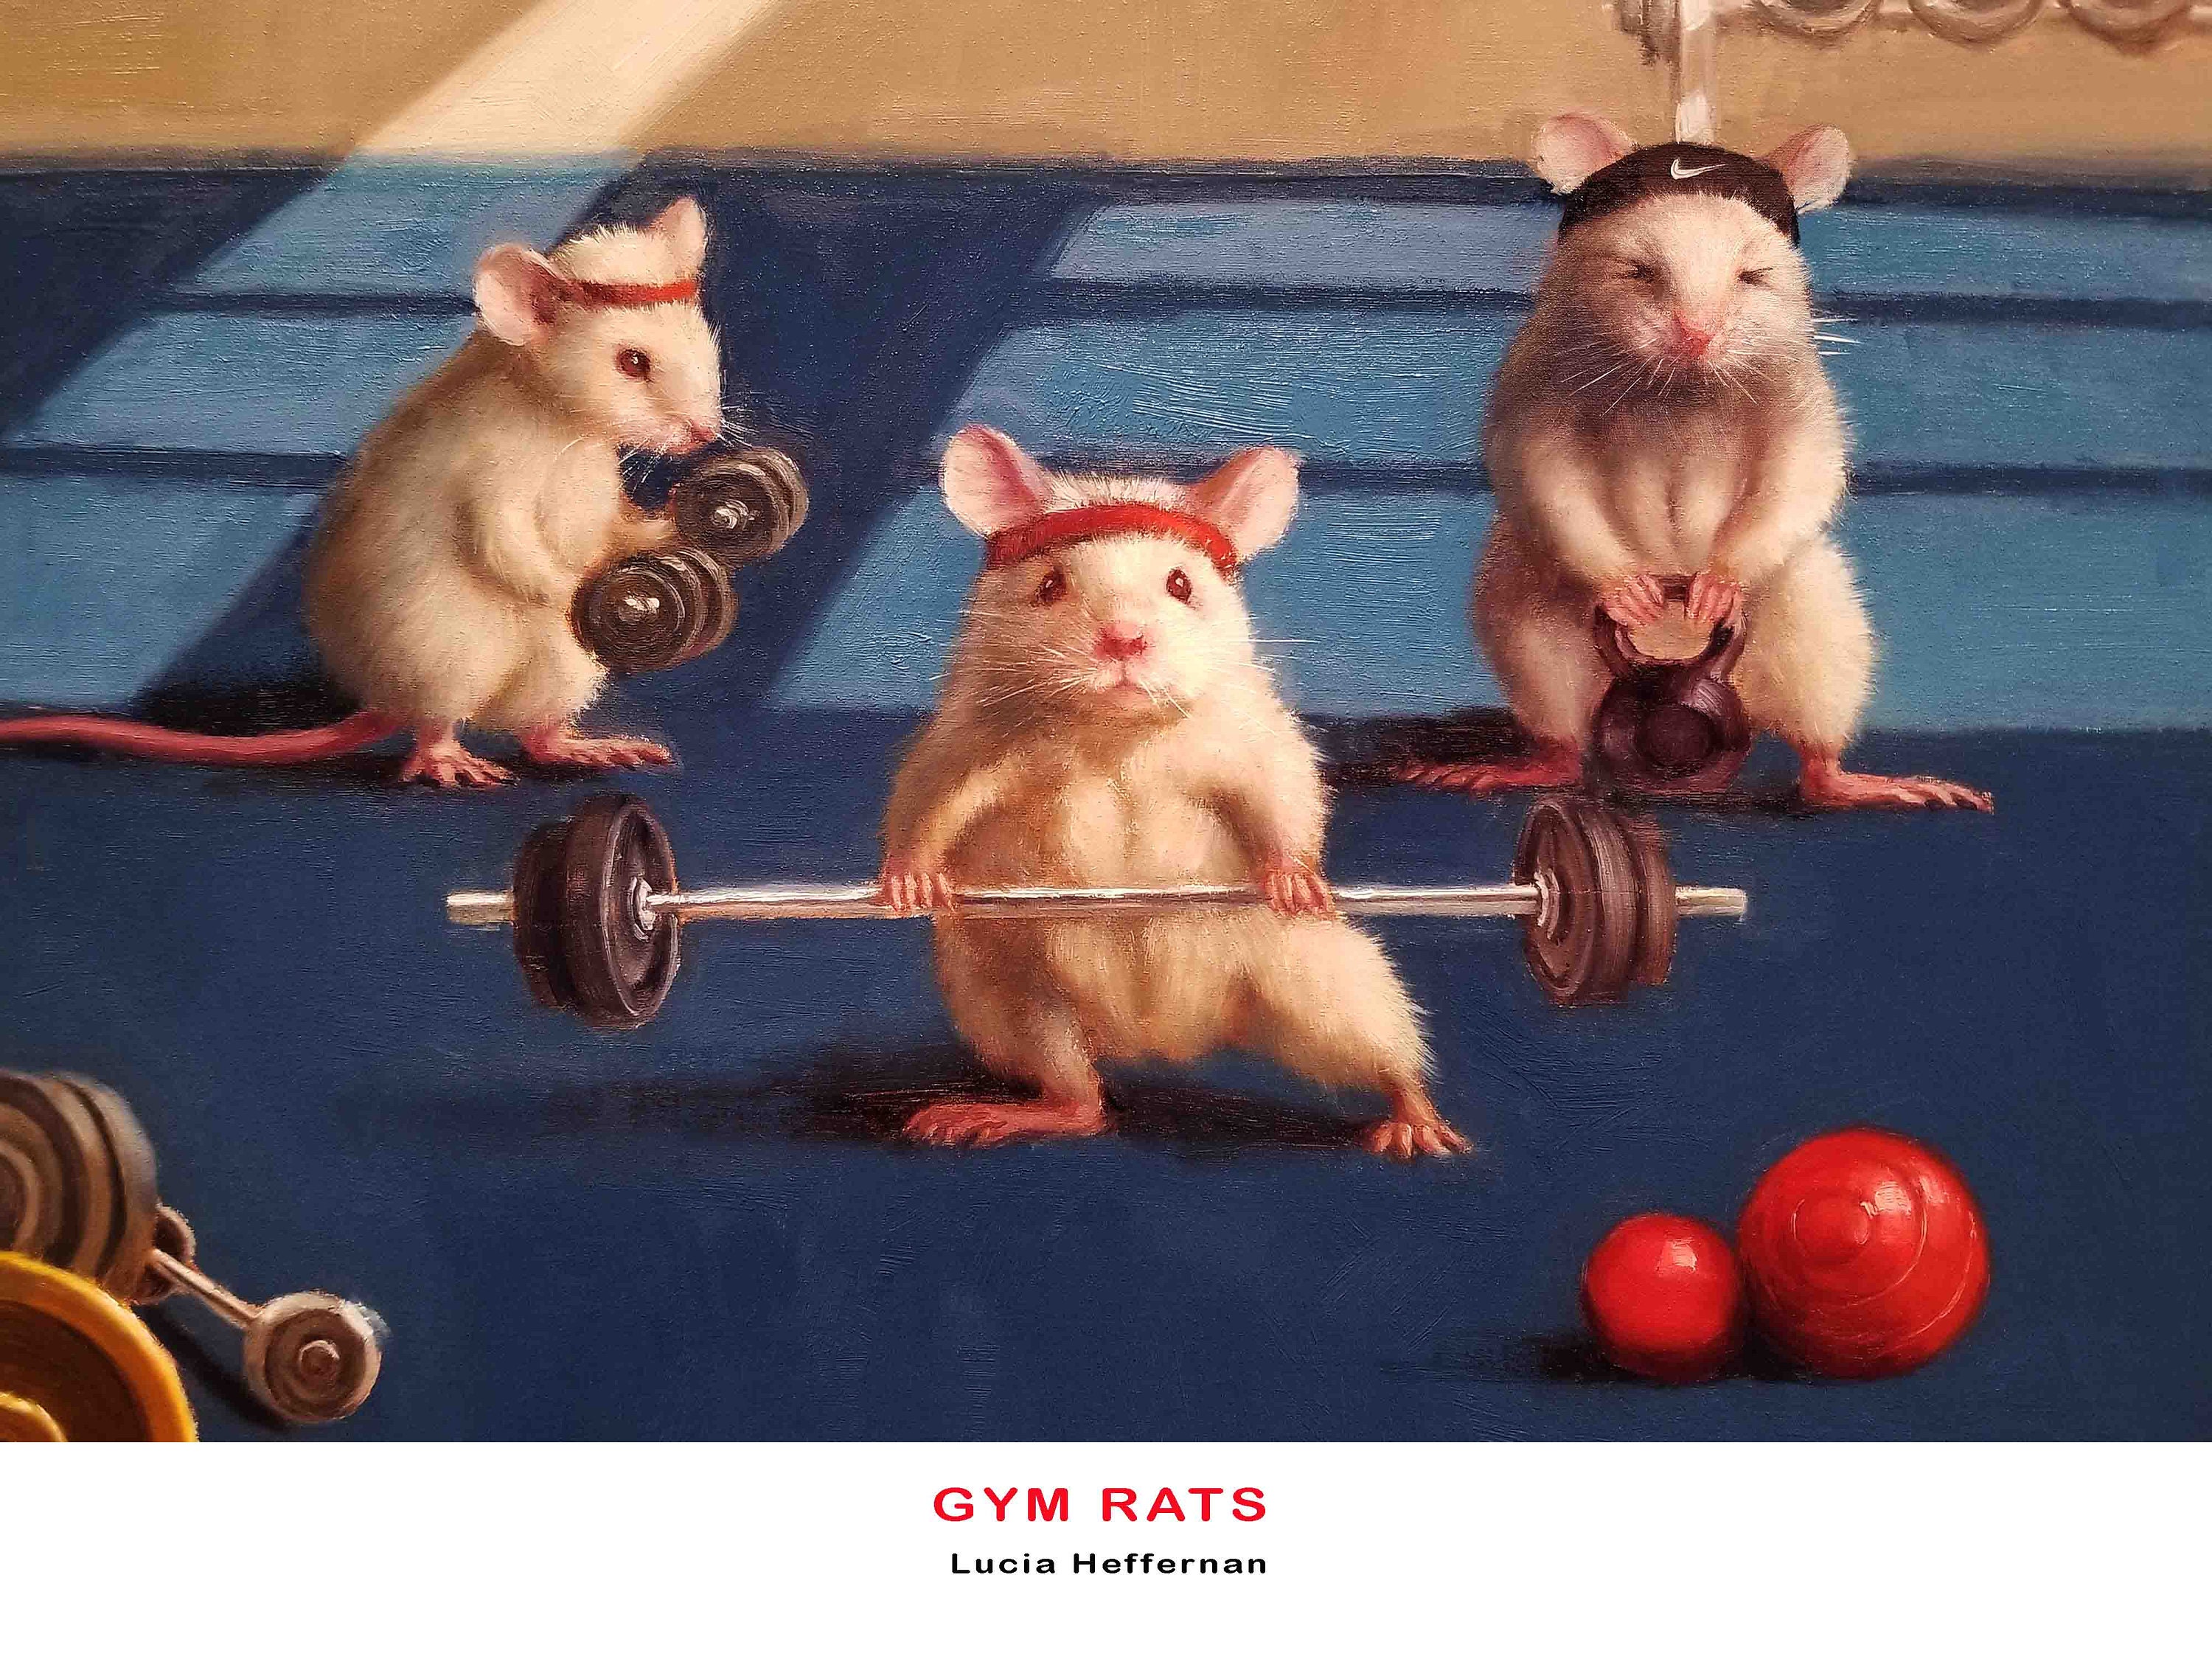 Gym Rats – The Gusher